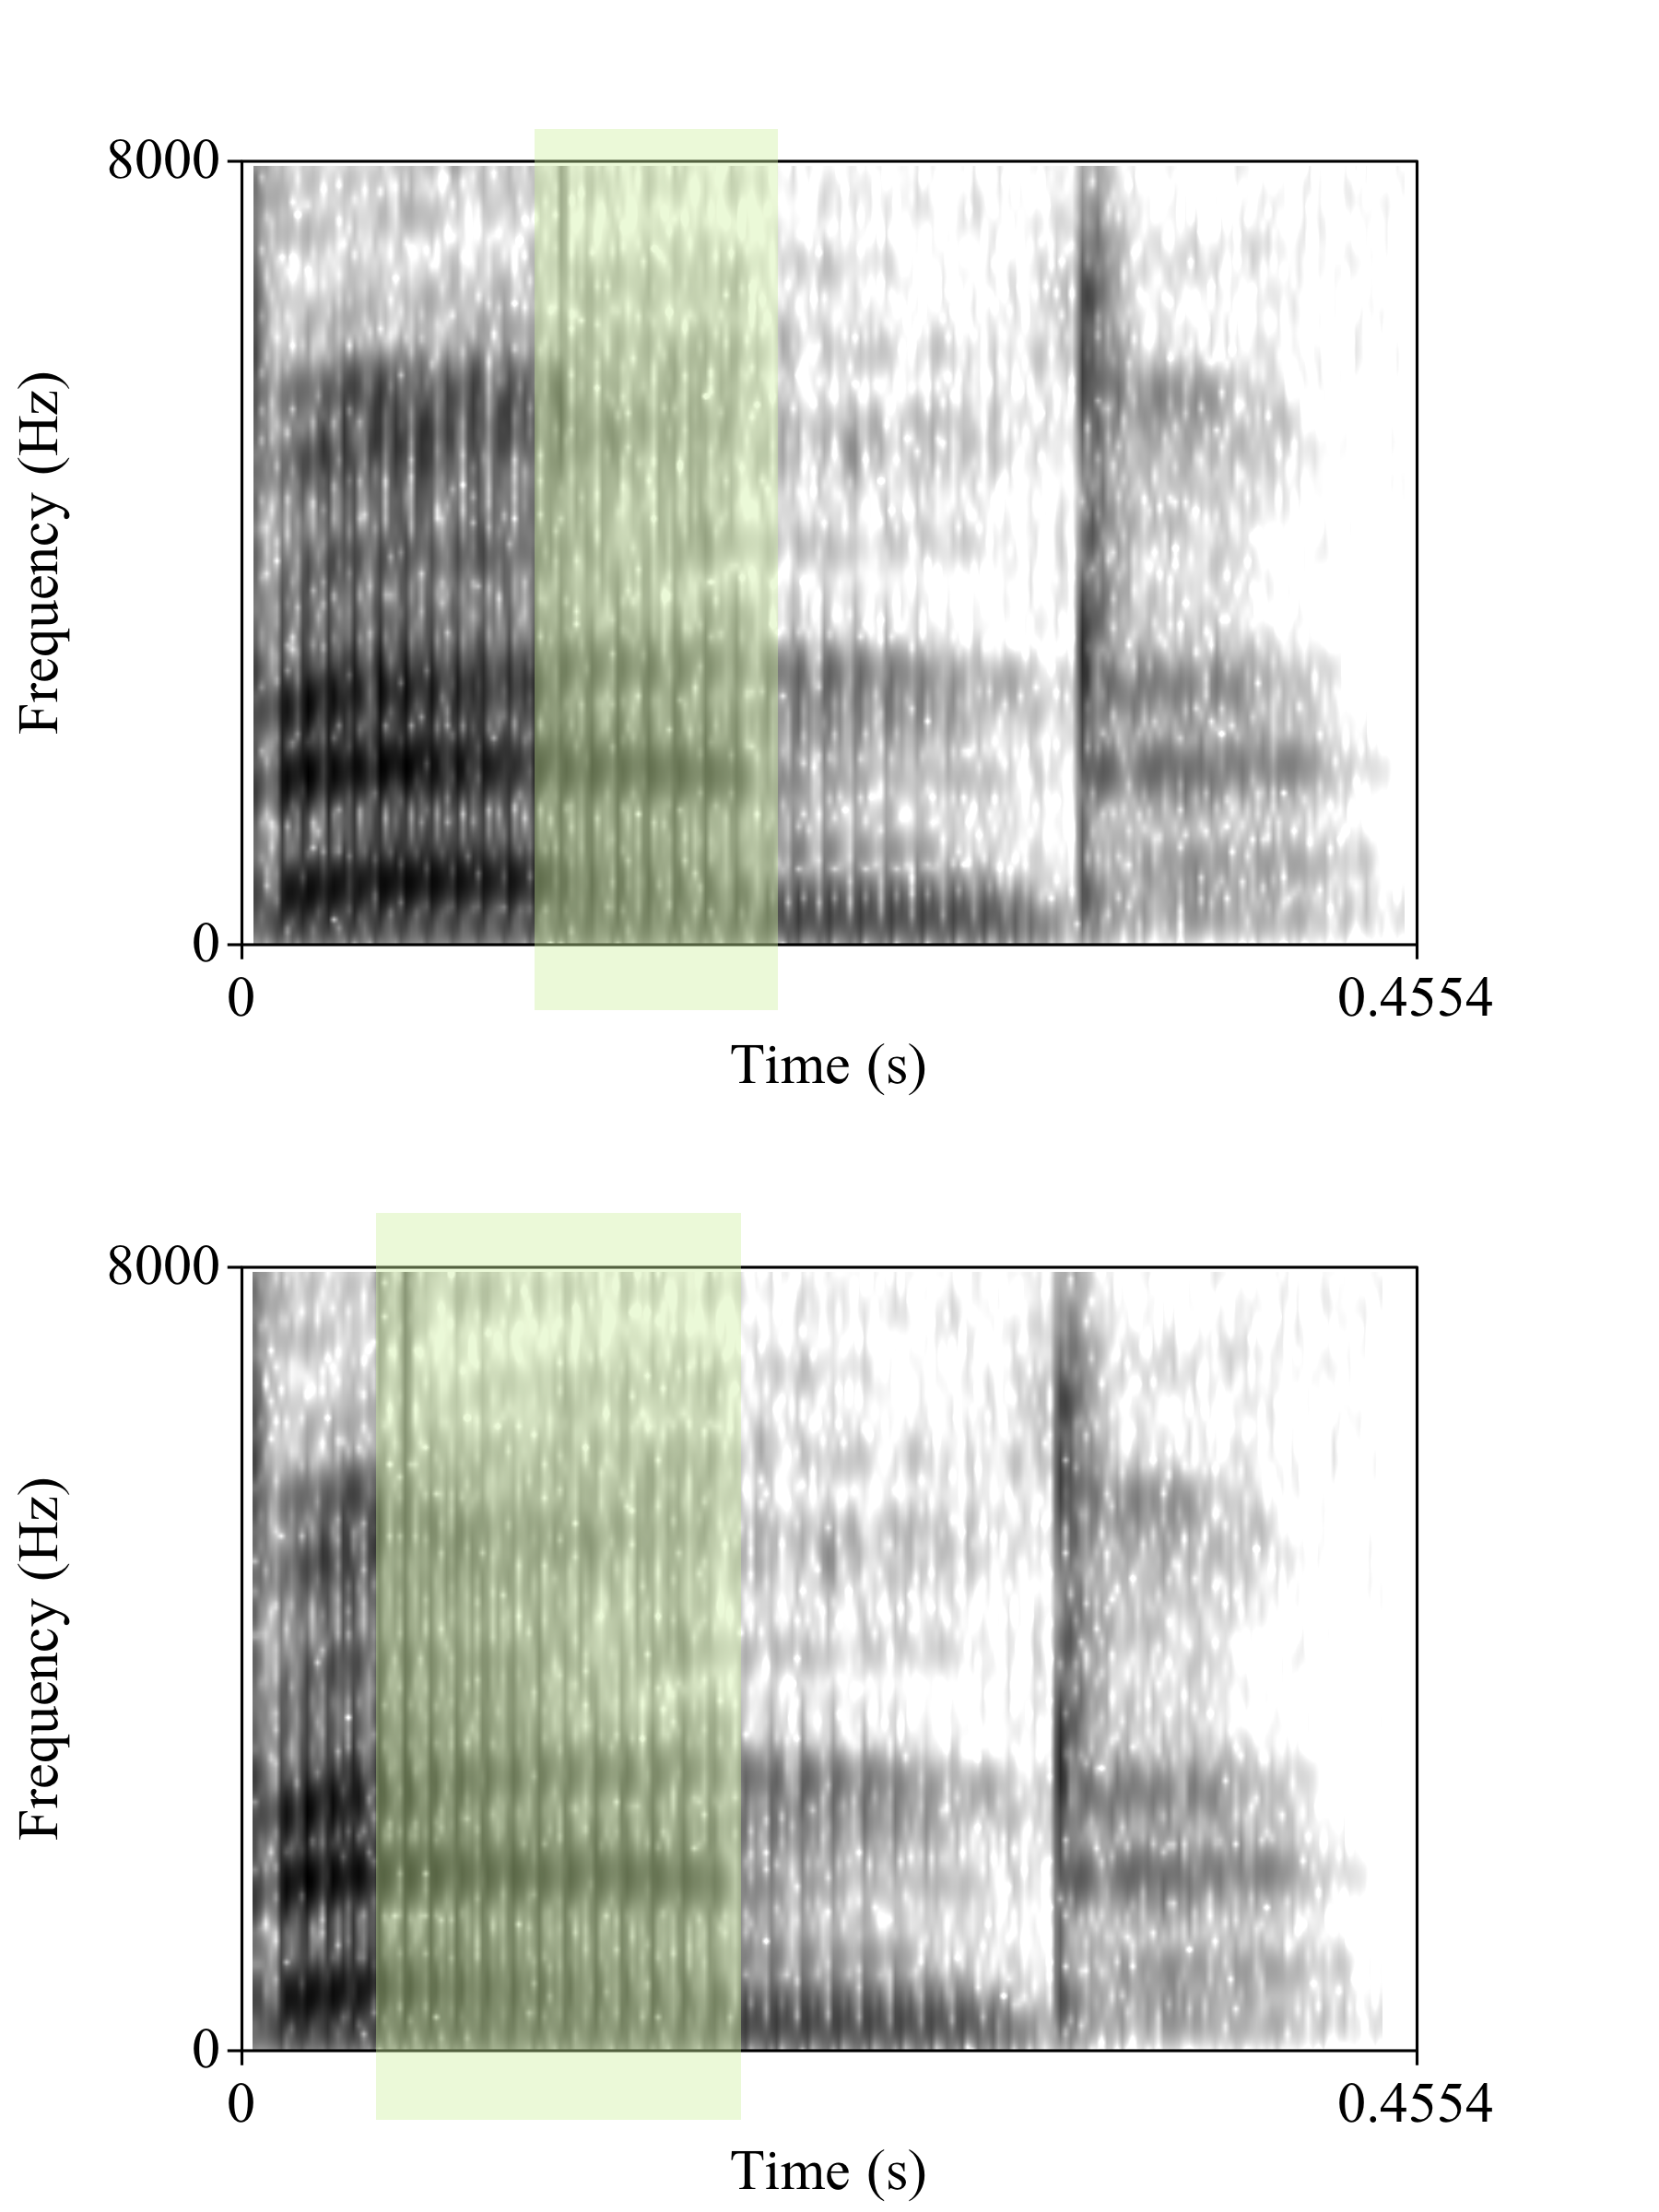 spectrograms of early and late onset nasalization 'bend'